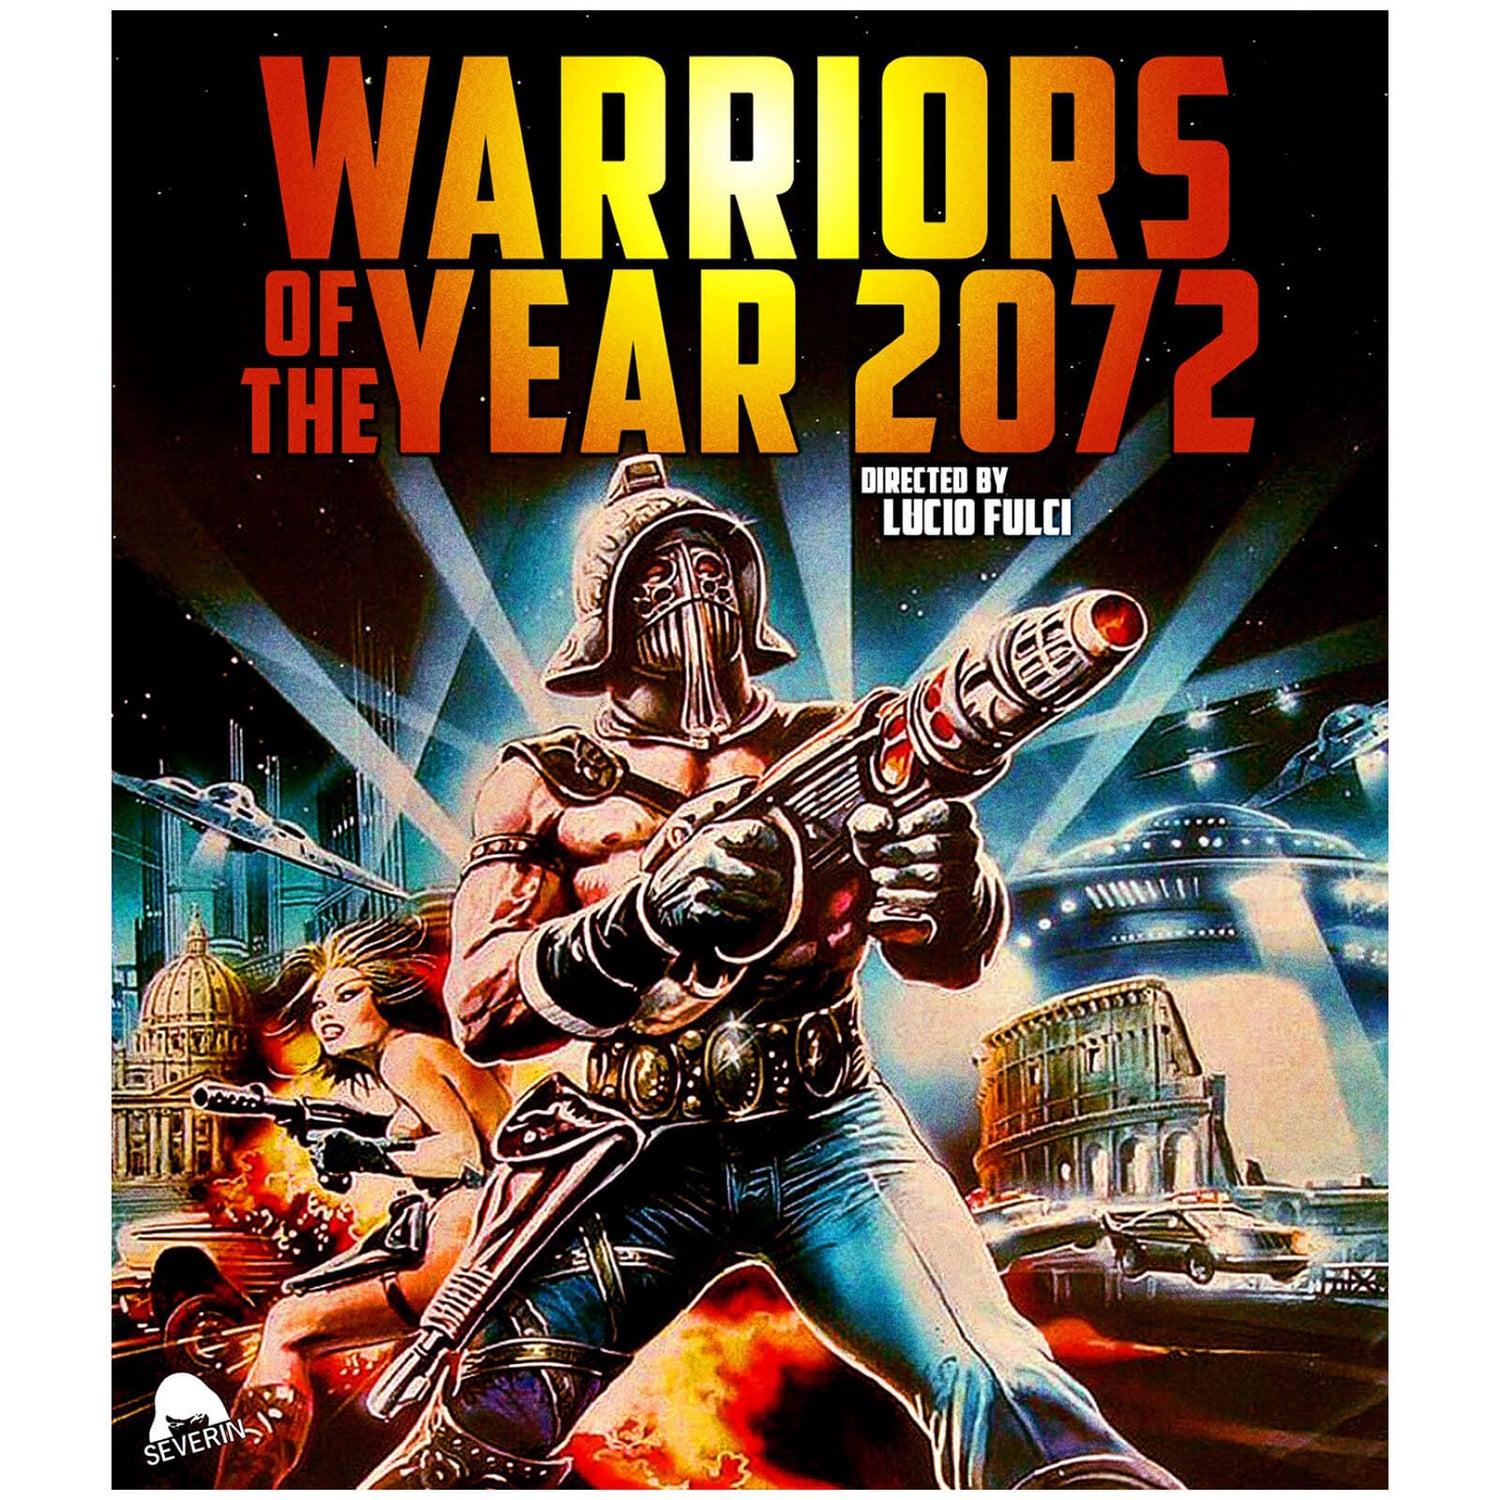 Warriors Of The Year 2072 (Includes CD)